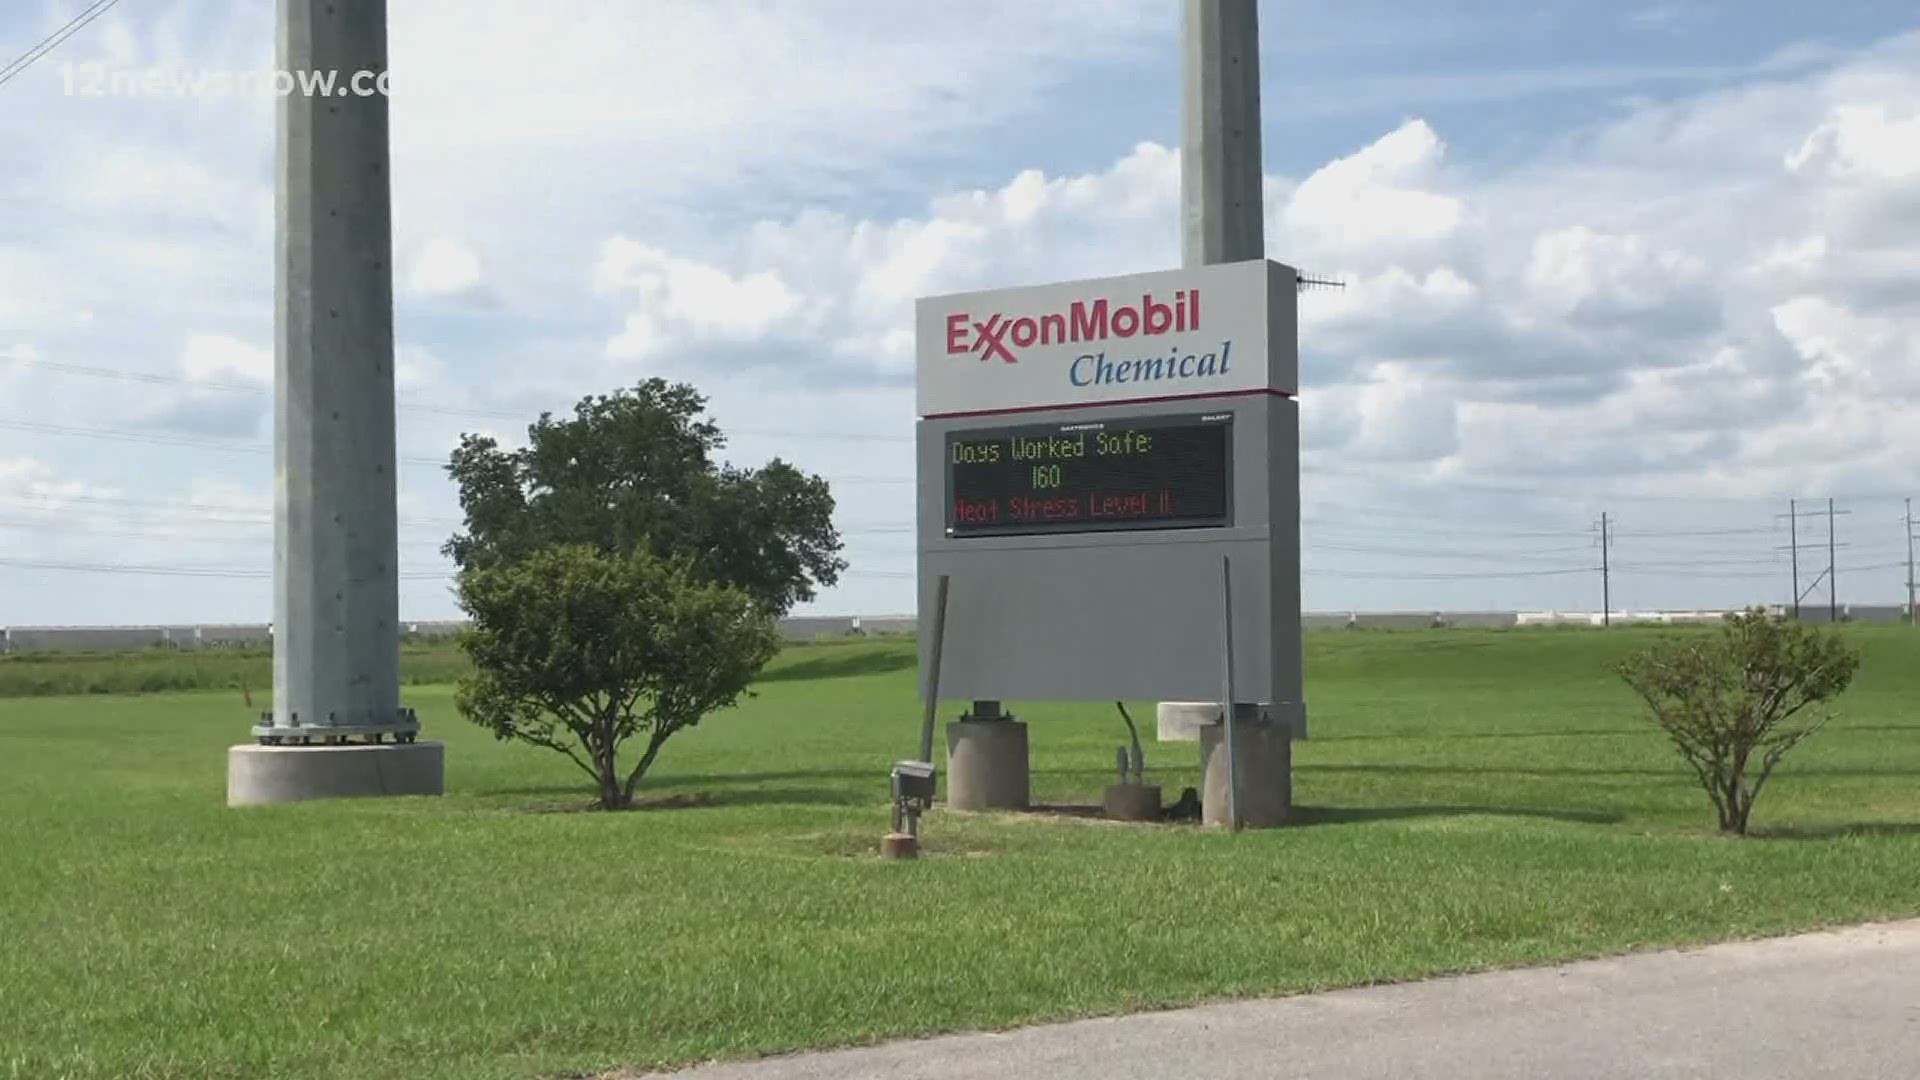 ExxonMobile said a power outage around 10:15 Sunday morning impacted the plant and resulted in a ground flare.